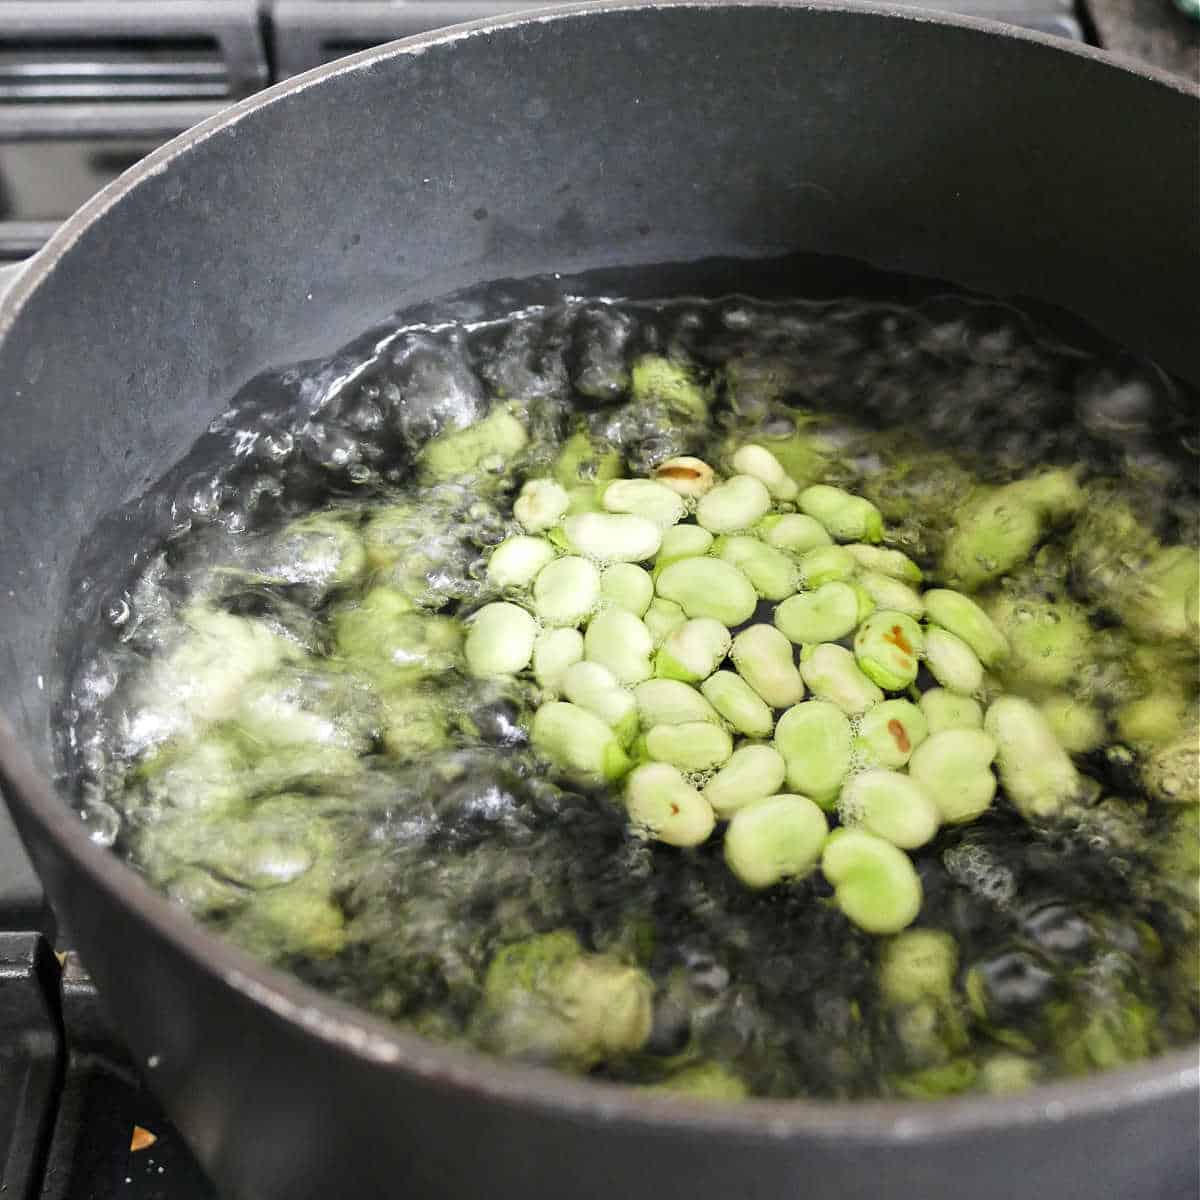 fava beans being blanched in a pot of boiling water on a stove